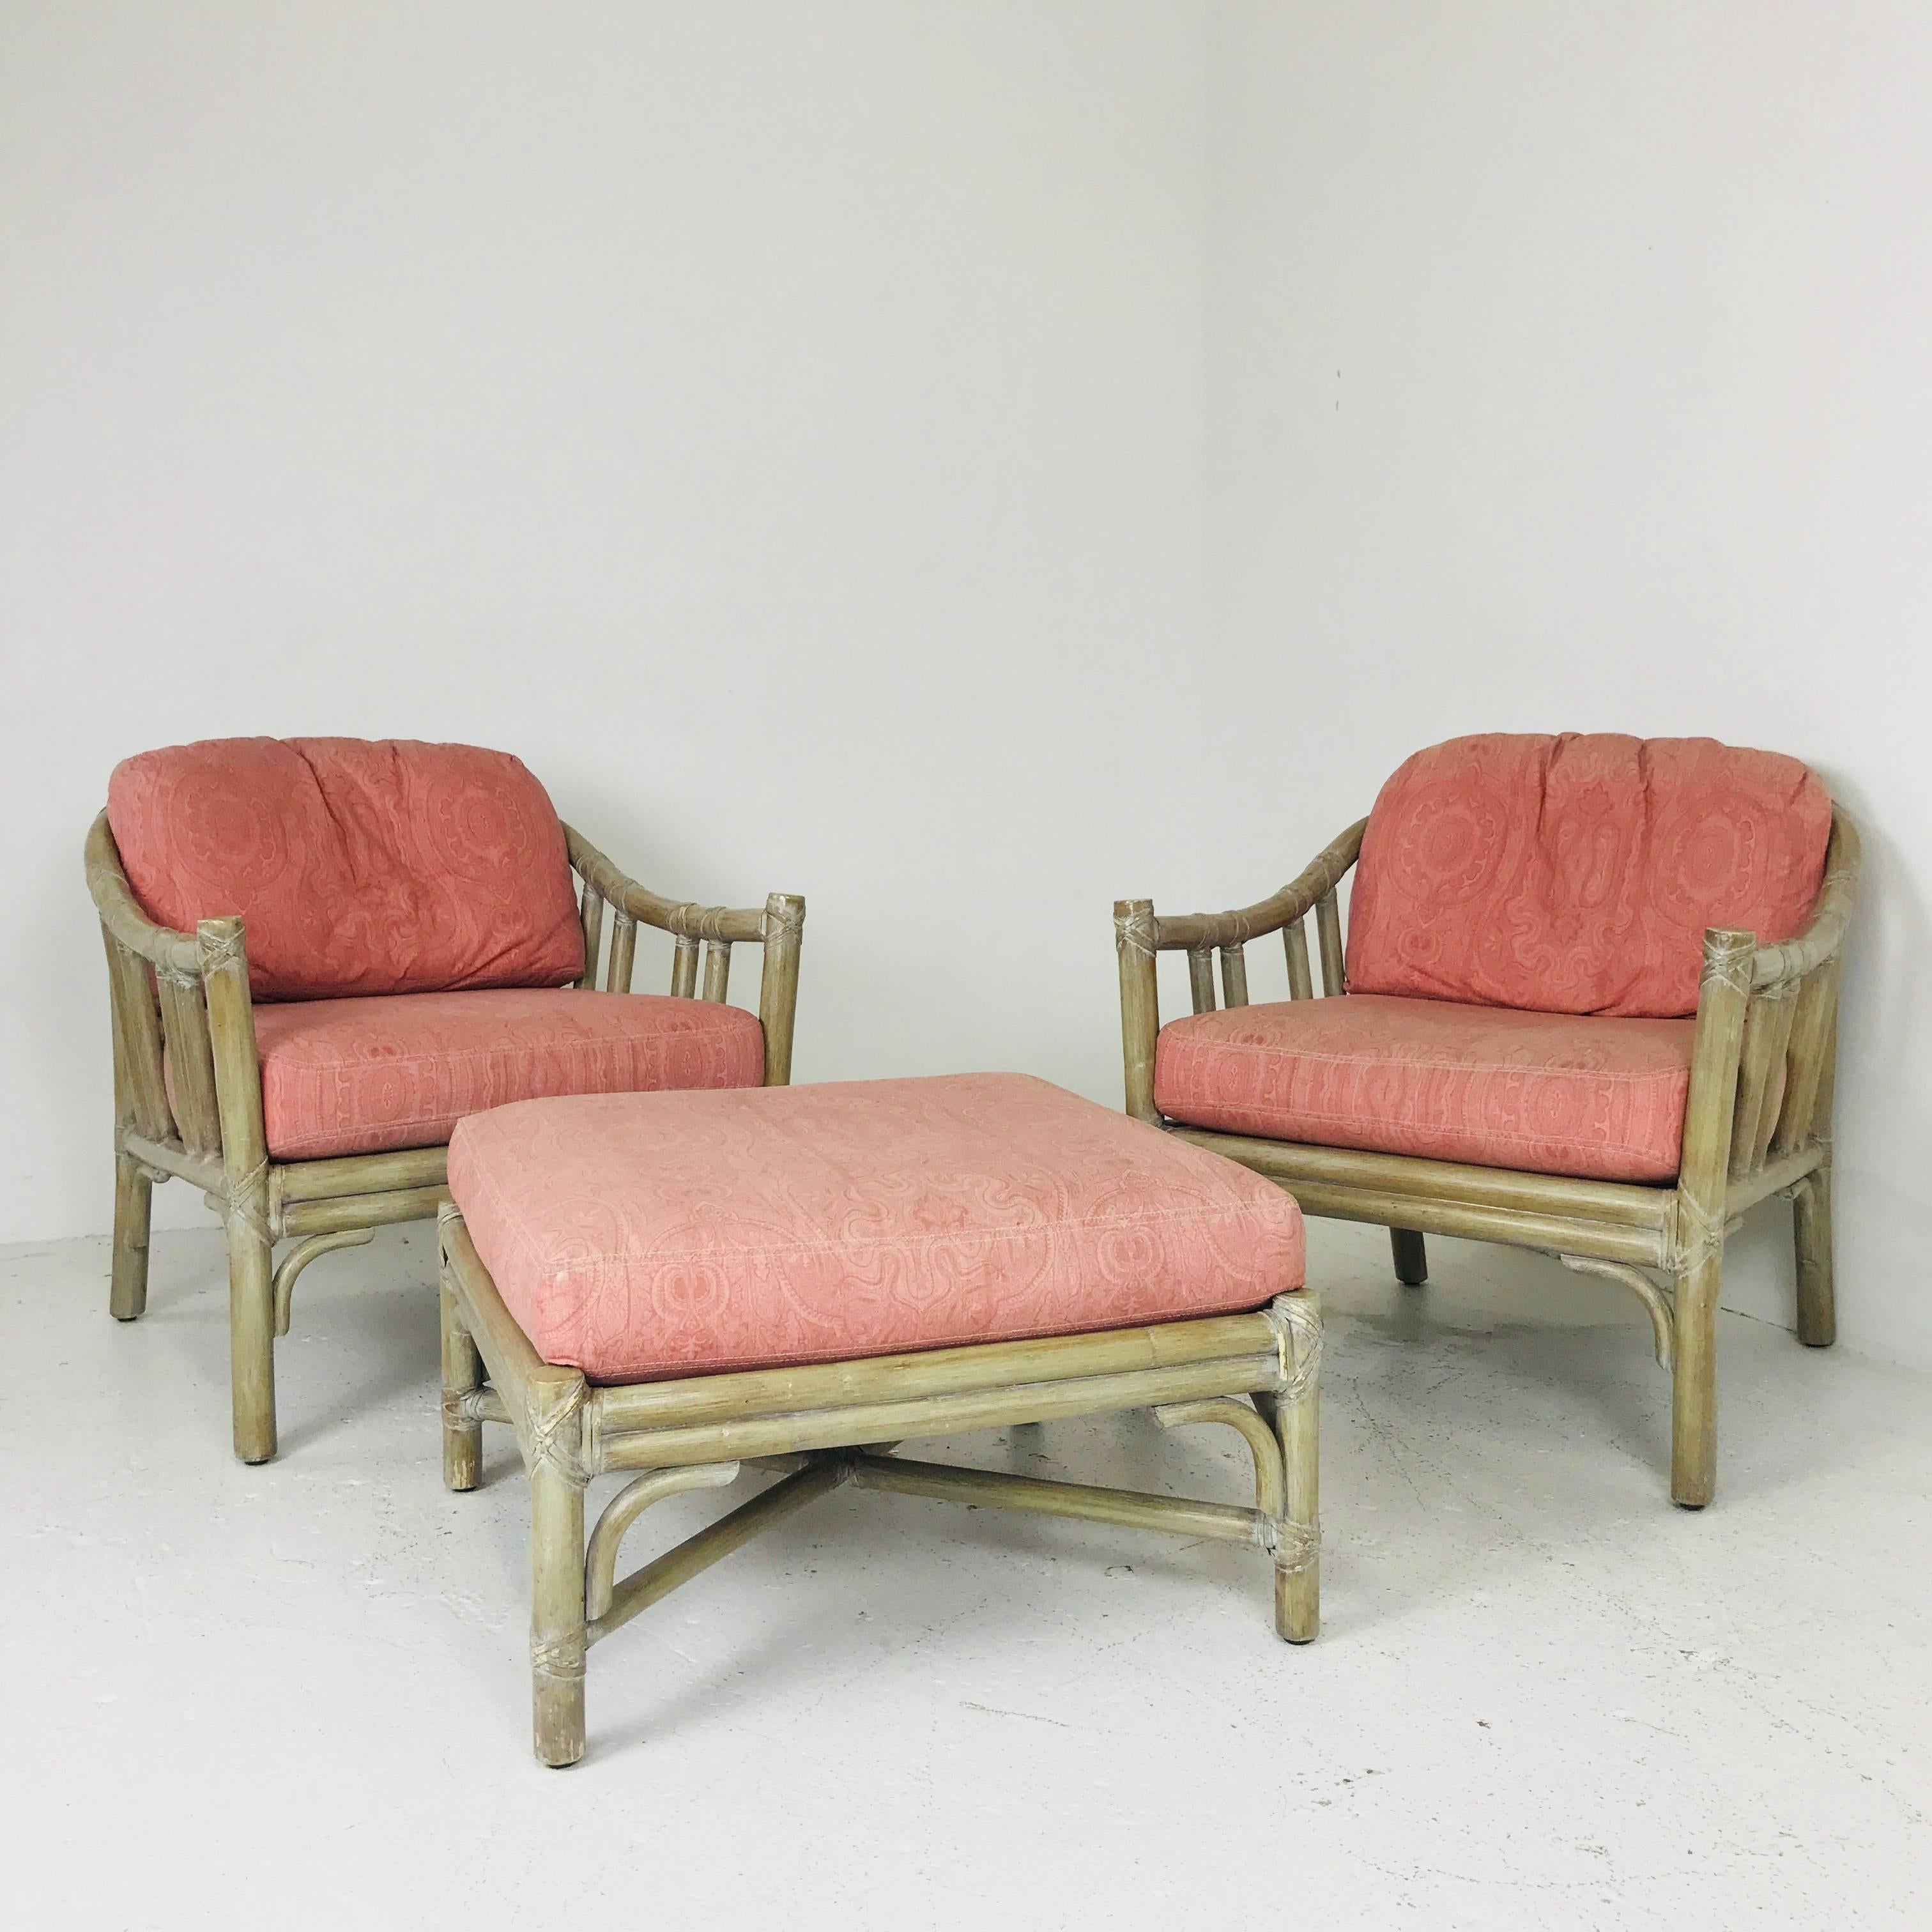 Pair of McGuire lounge chairs with ottoman. Chairs and ottoman are in good vintage condition with wear due to age and use. New upholstery and finish is recommend but can be used as is.

Dimensions: 27.5